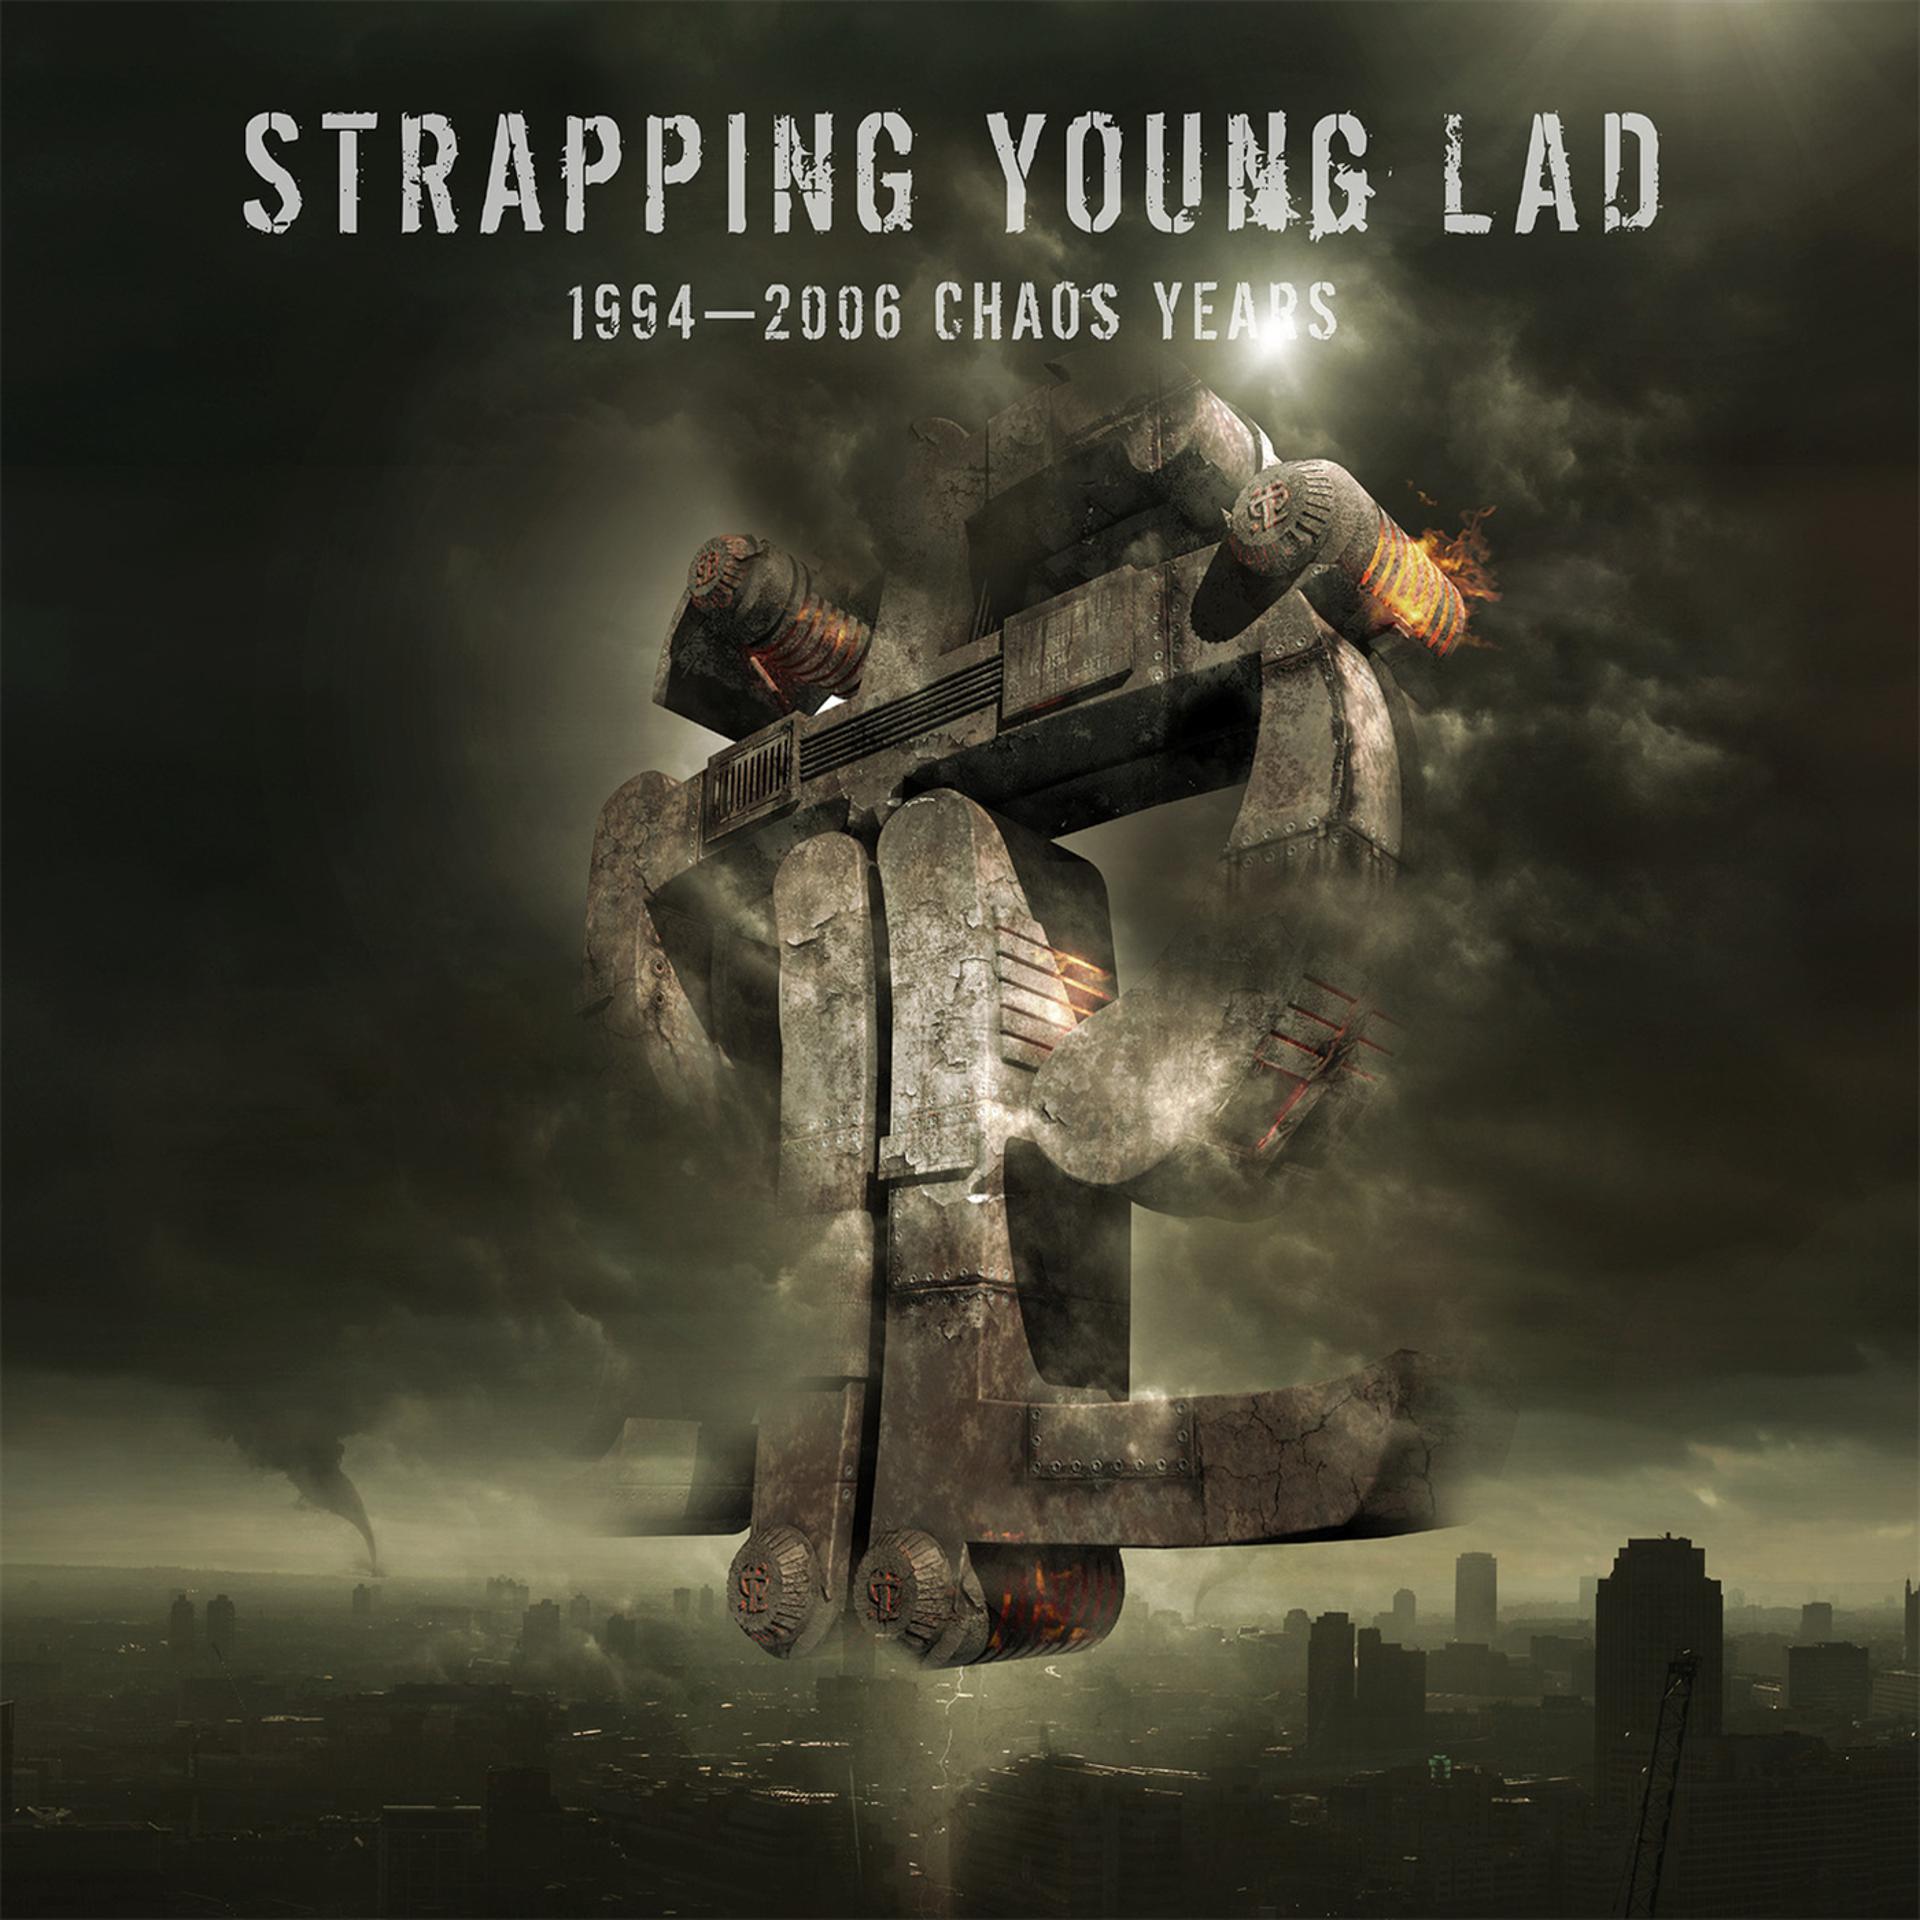 Strapping young. Strapping young lad группа. Девина Таунсенда Strapping young lad. Strapping young lad City 1997. Strapping young lad discography.